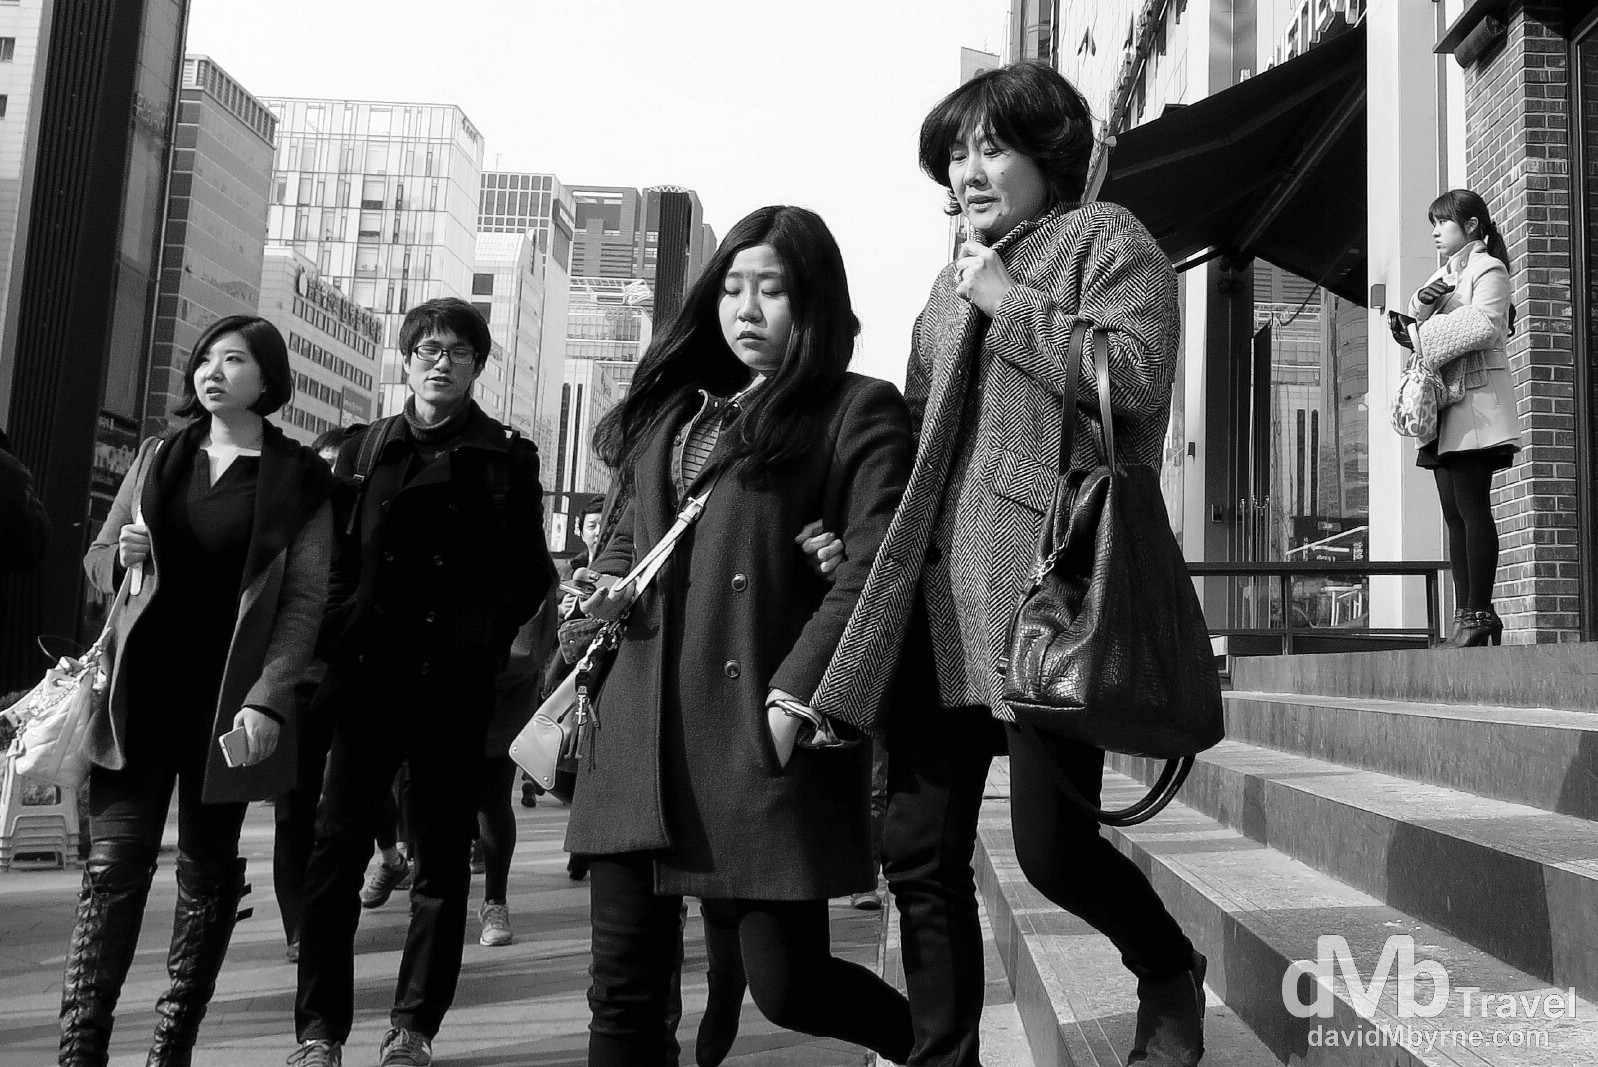 On the cold streets of the Gangnam district of Seoul, South Korea. February 26th 2013.